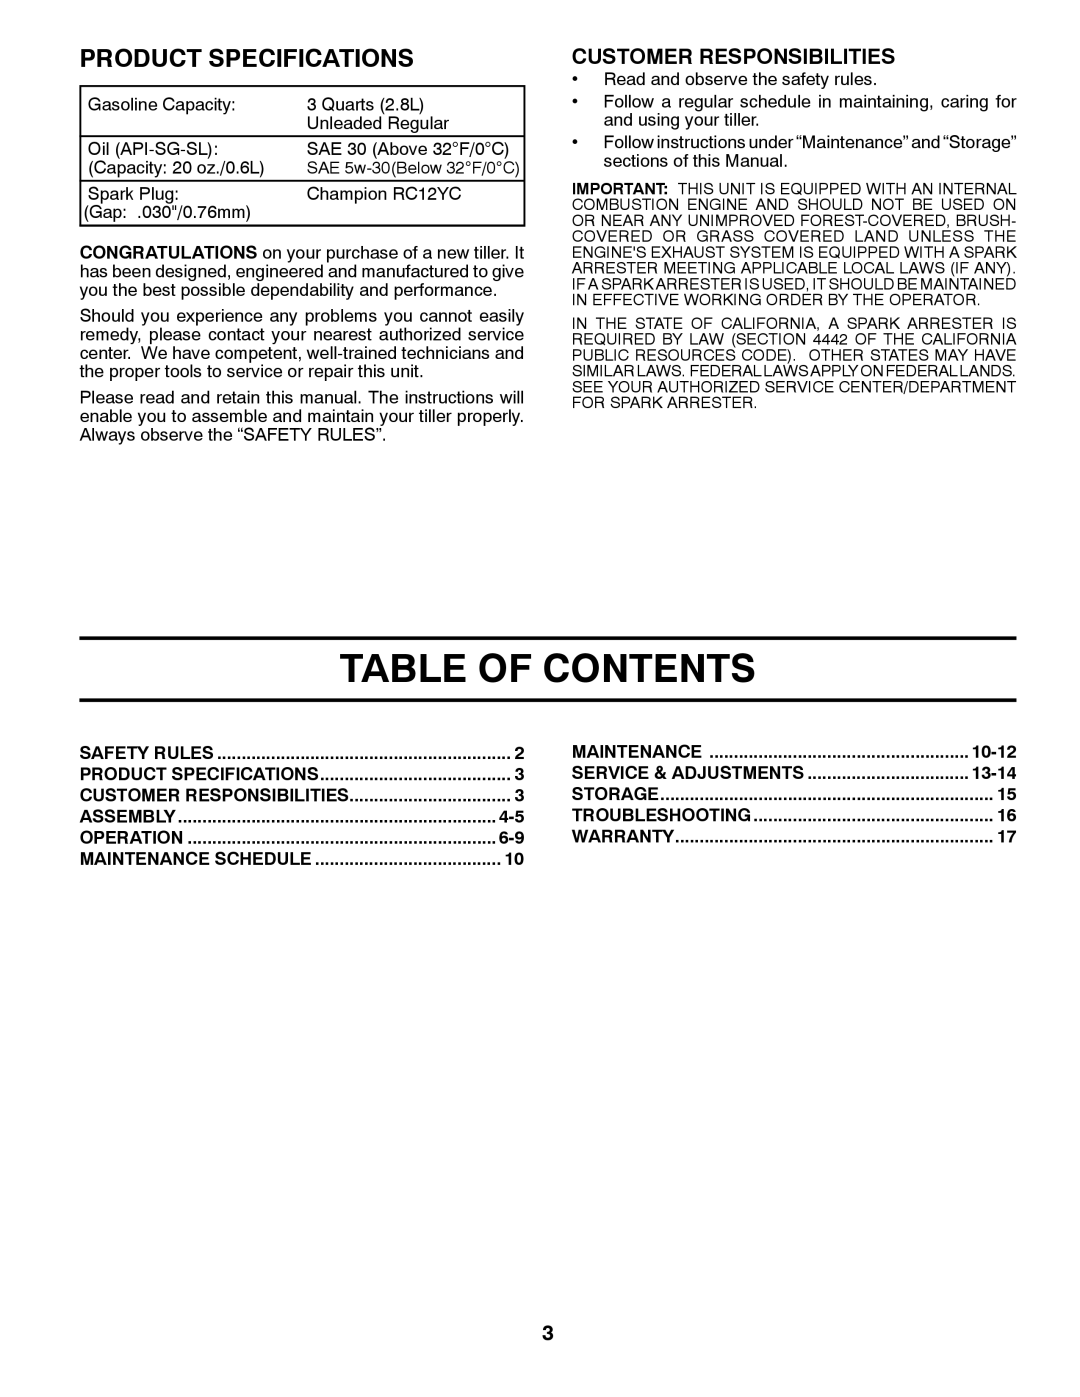 Poulan 432822, 96082001900 manual Table Of Contents, Product Specifications, Customer Responsibilities, 10-12, 13-14 